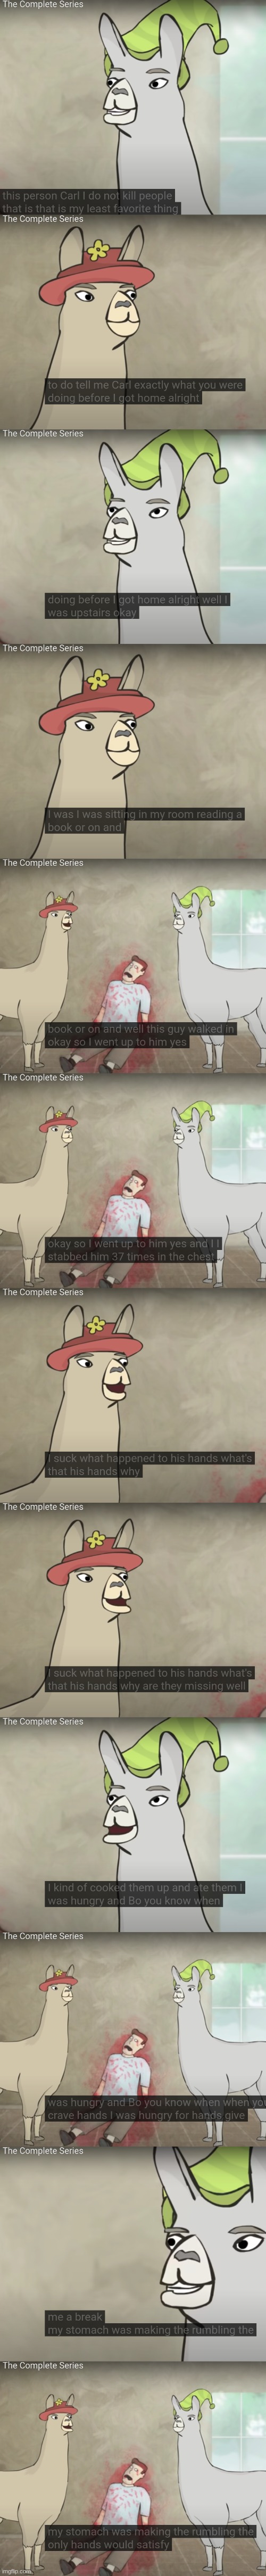 the single best scene in history | image tagged in llamas with hats,carl,funny,dark humor,comics/cartoons,violence | made w/ Imgflip meme maker